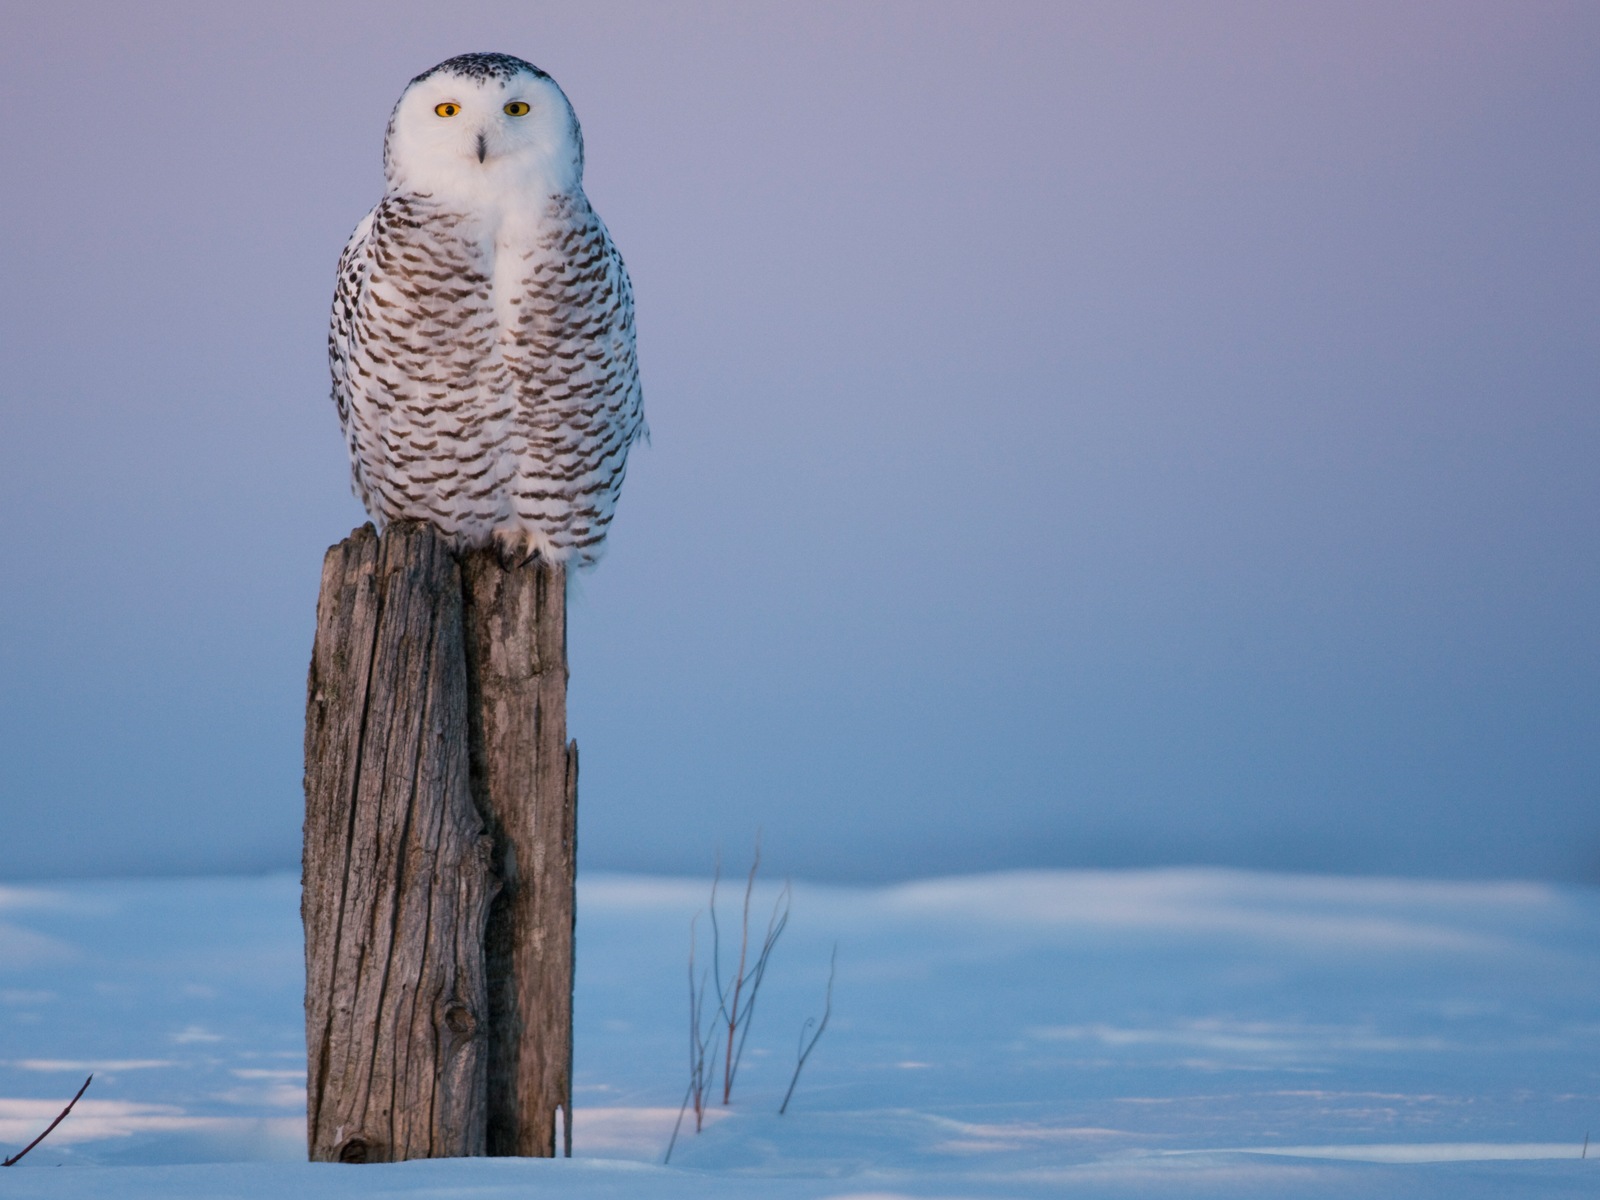 Windows 8 Wallpapers: Arctic, the nature ecological landscape, arctic animals #2 - 1600x1200